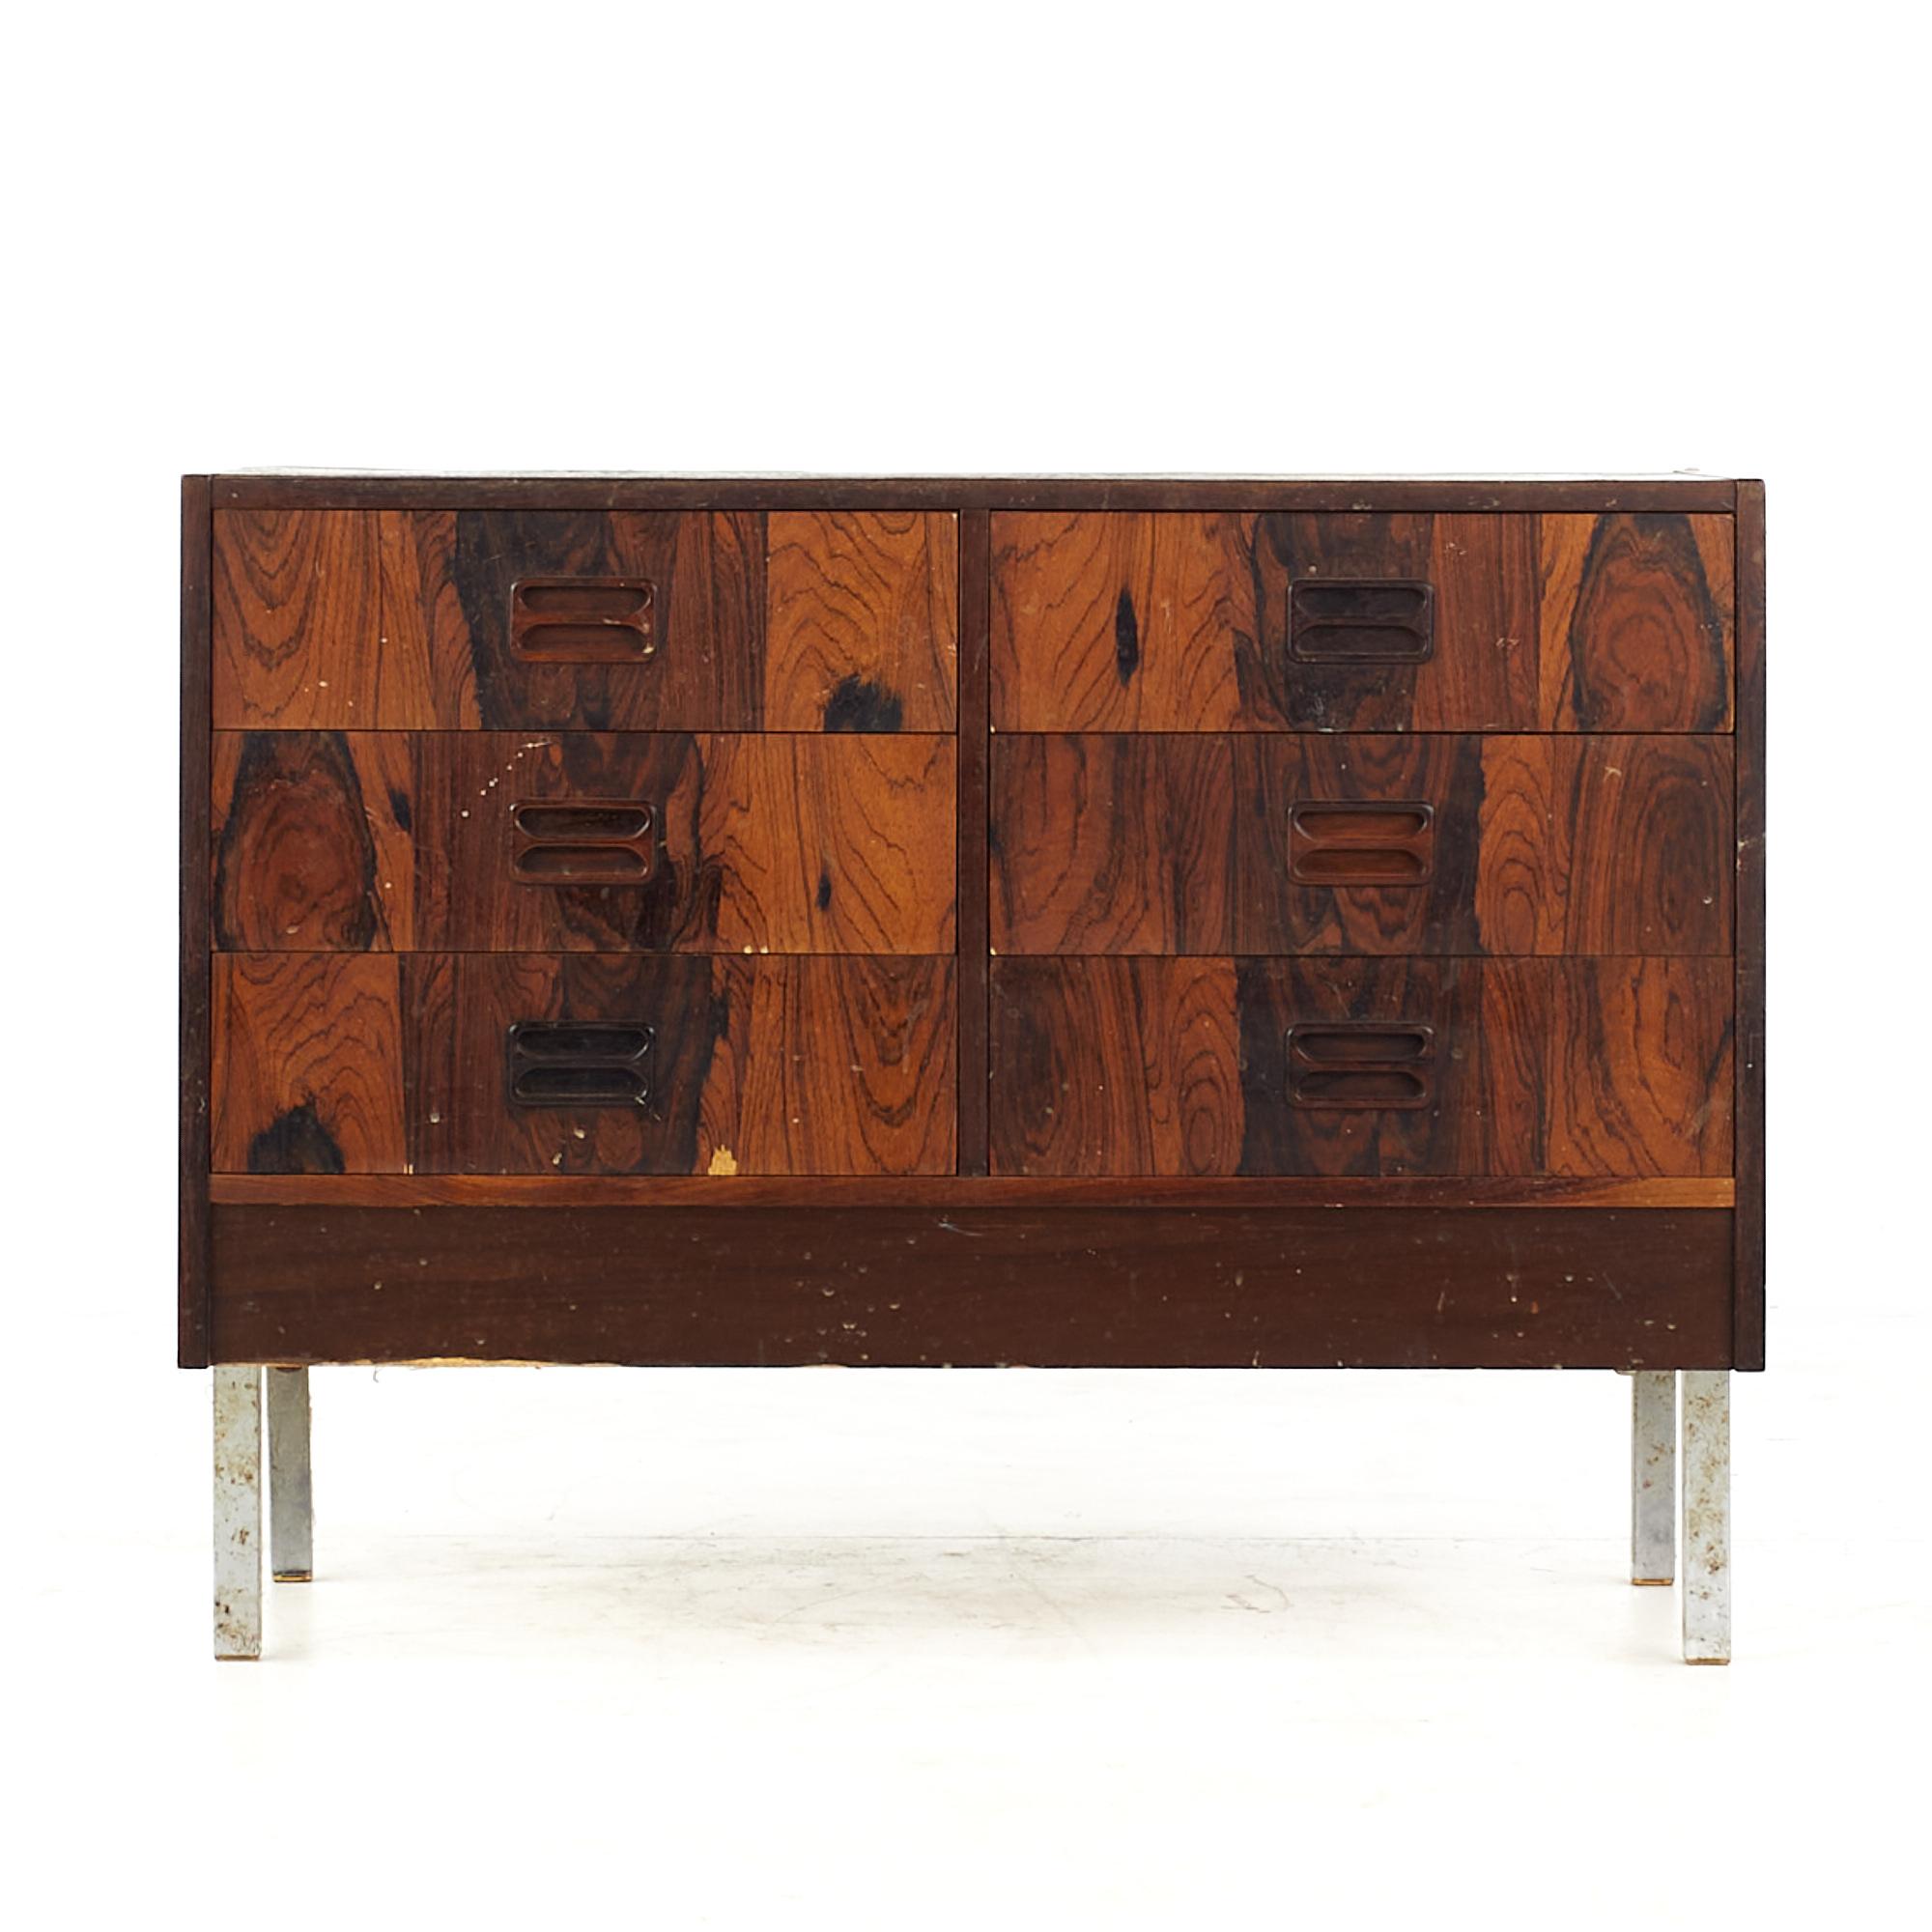 Mid Century Rosewood and Chrome Danish dresser chest of drawers

This dresser measures: 34.25 wide x 16.5 deep x 25.75 inches high

All pieces of furniture can be had in what we call restored vintage condition. That means the piece is restored